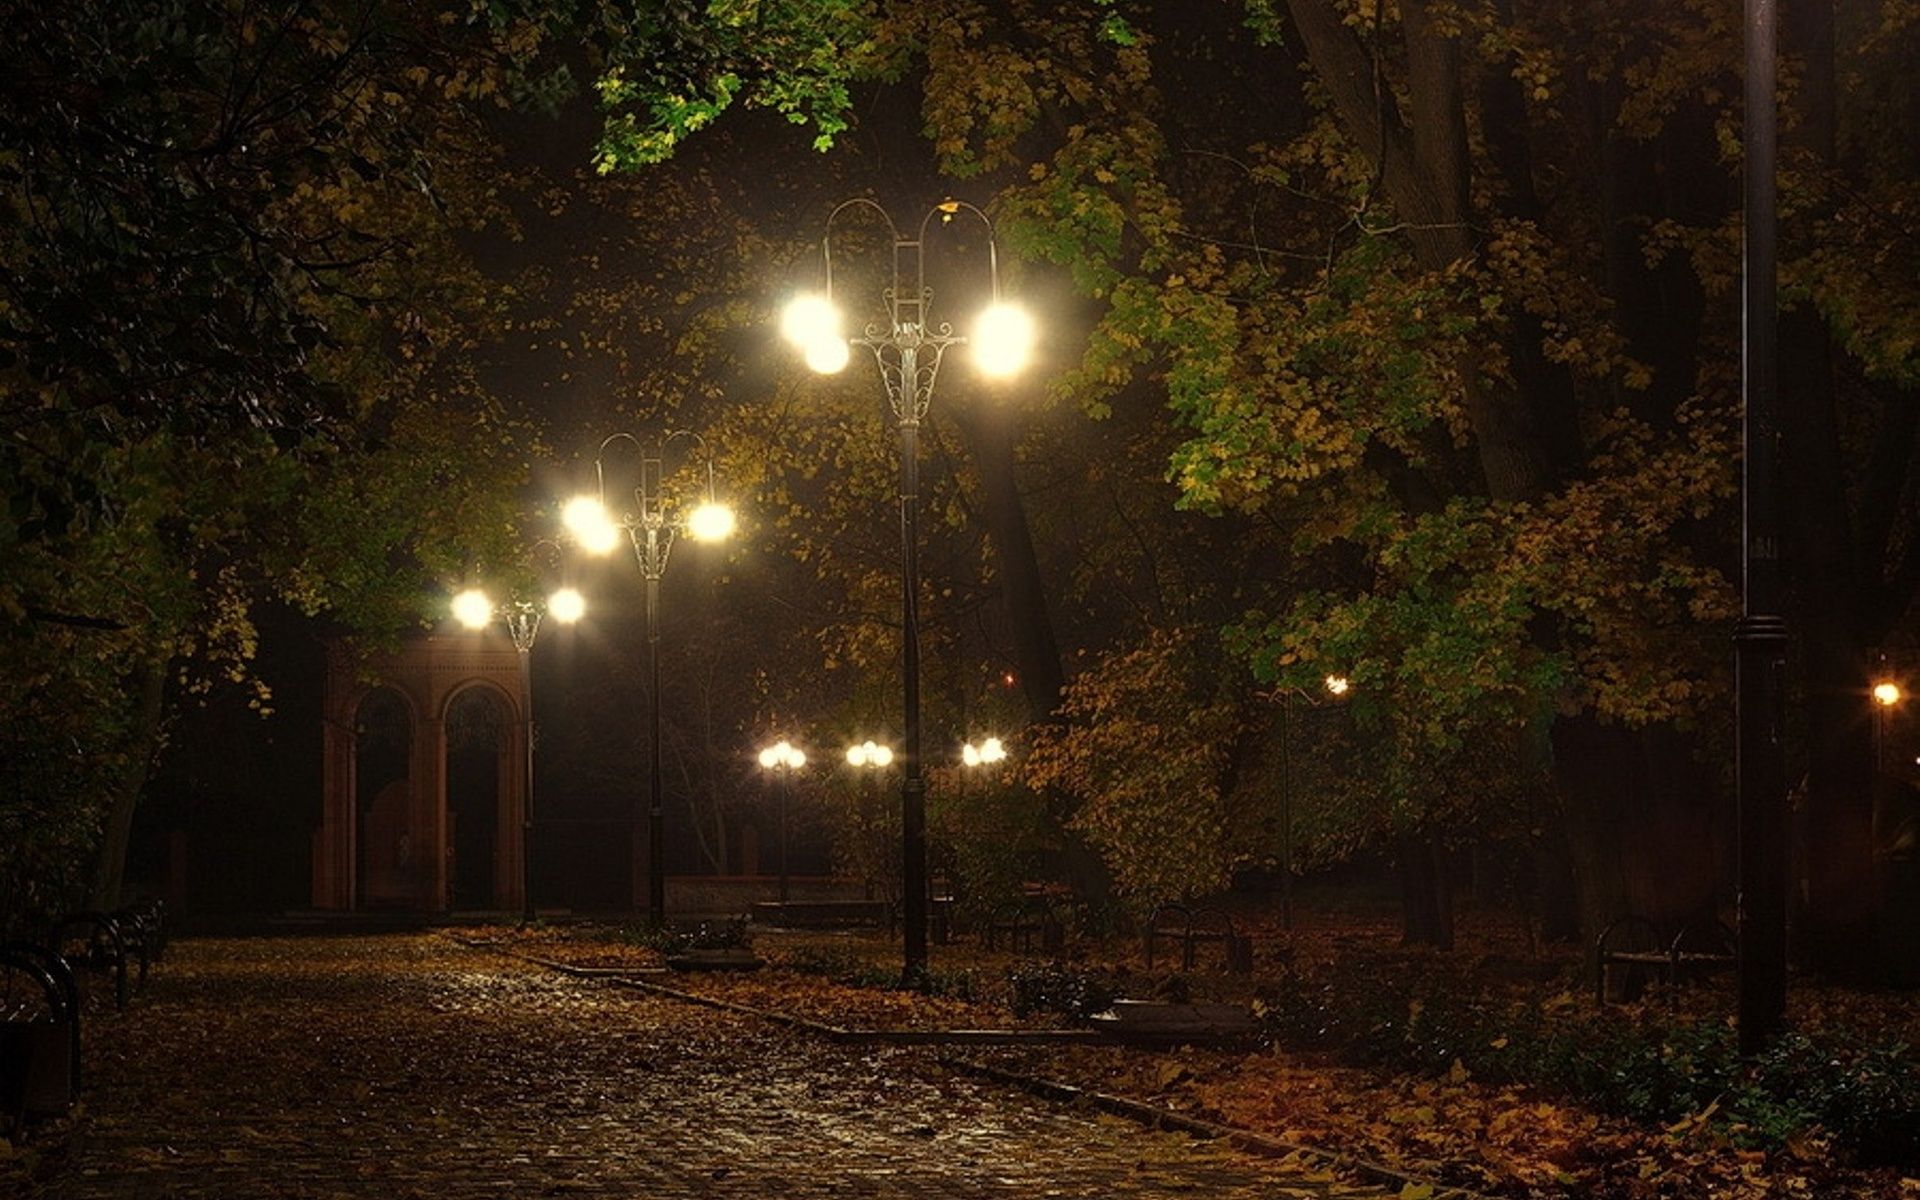 Landscapes Lamps Lamp Posts Benches Lights Night Pathways Roads Lanes Autumn Fall Seasons Trees Leaves Mood Wallpaperx1200